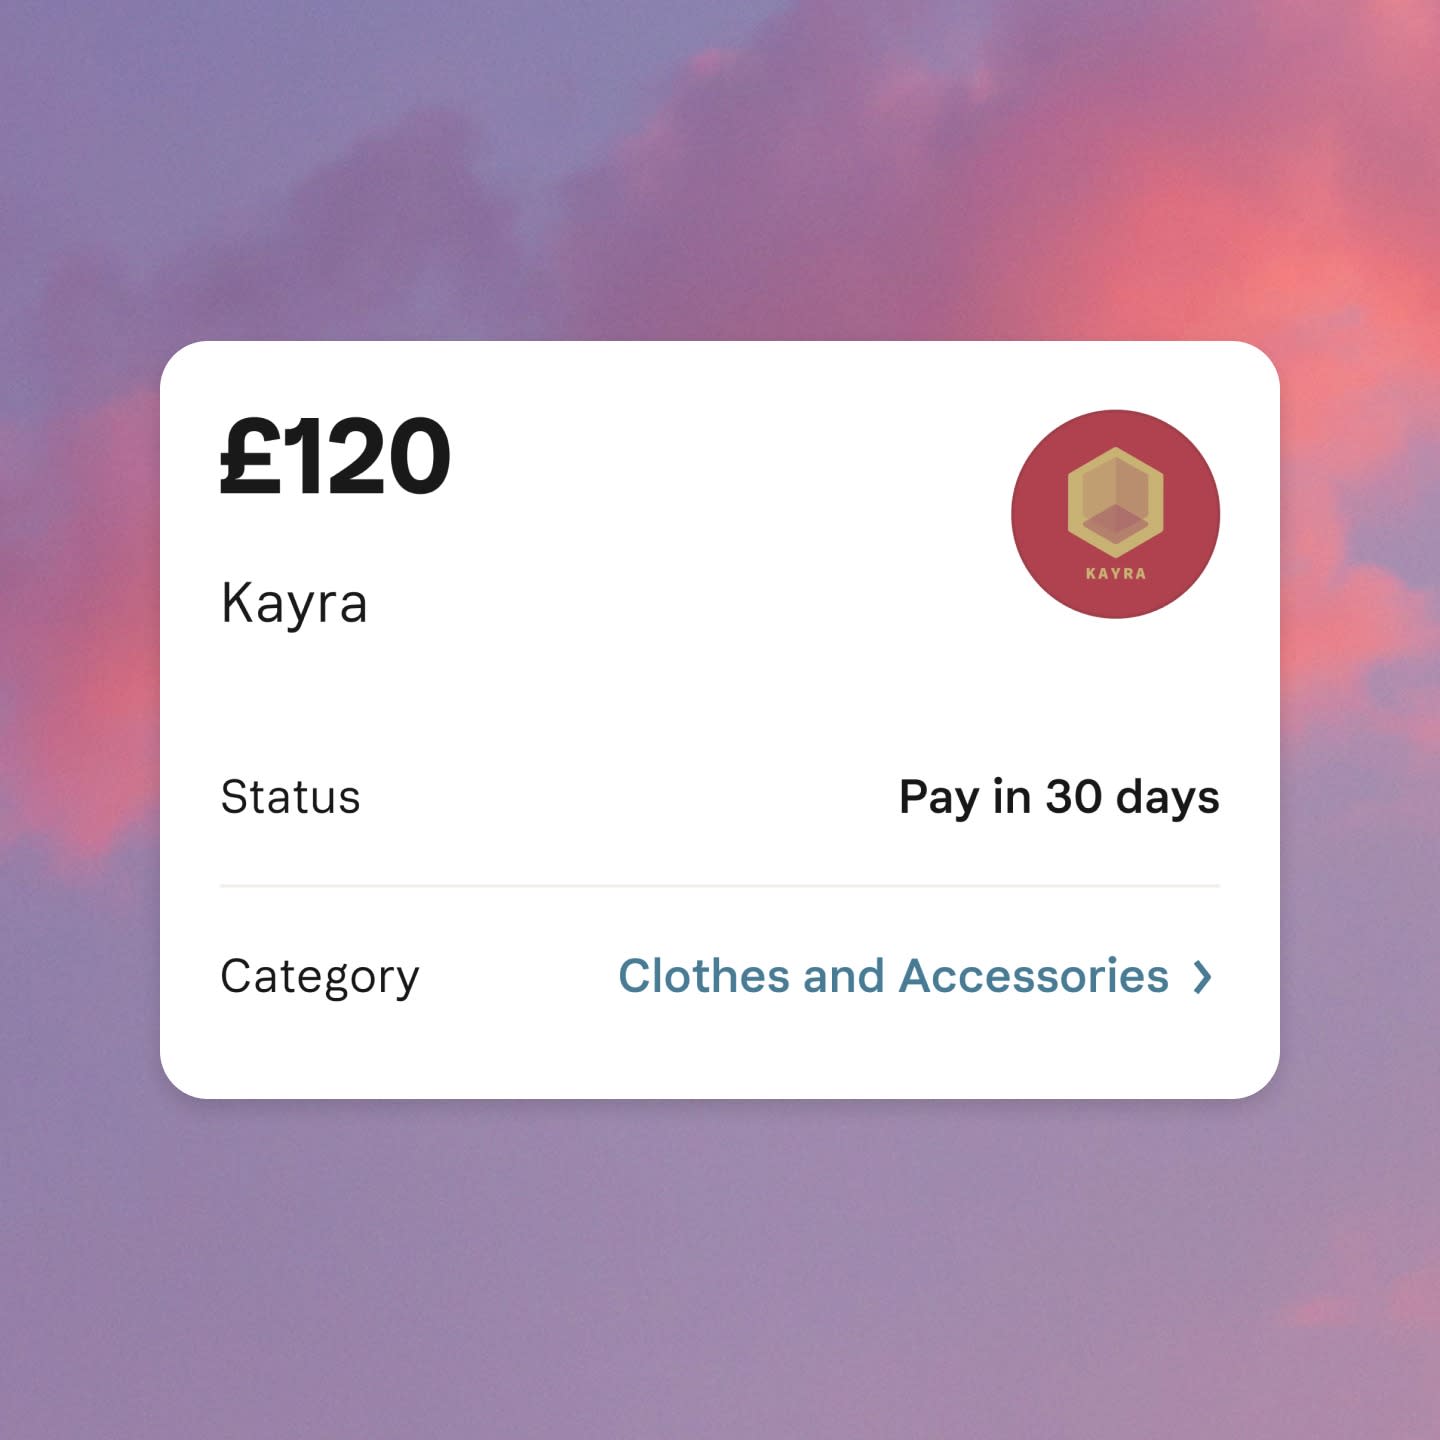 Post-purchase screen in the Klarna app showing recent pay later purchase